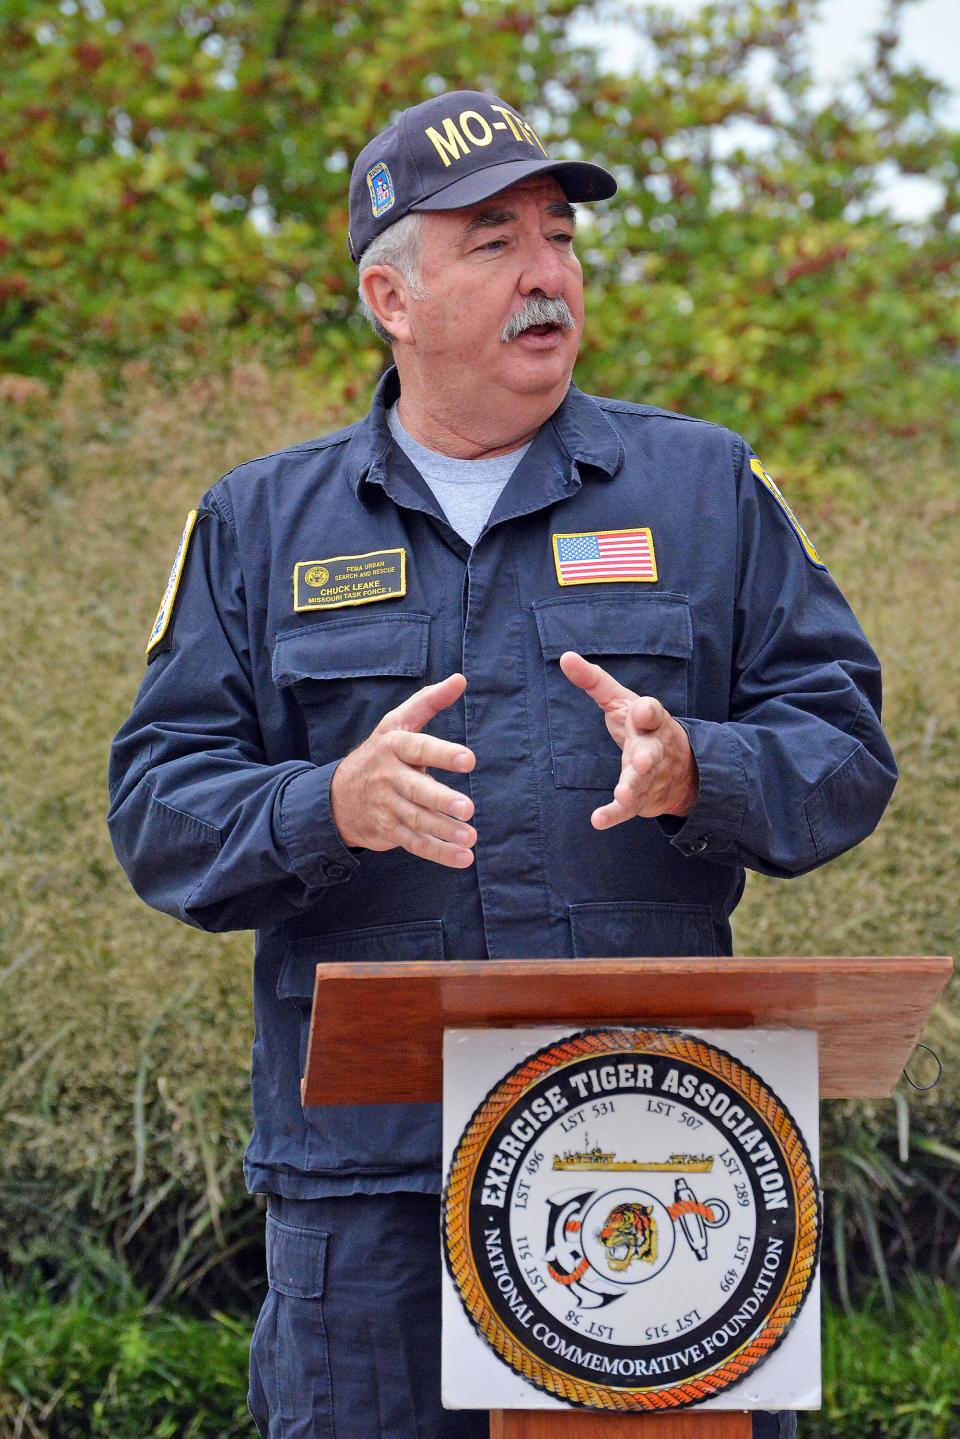 Chuck Leake, Boone County Fire Protection District assitant chief, was part of Missouri Task Force 1 when it was deployed to New York City on Sept. 11, 2001. He gave remarks Monday at memorial service for the lives lost in the attacks 22 years ago.